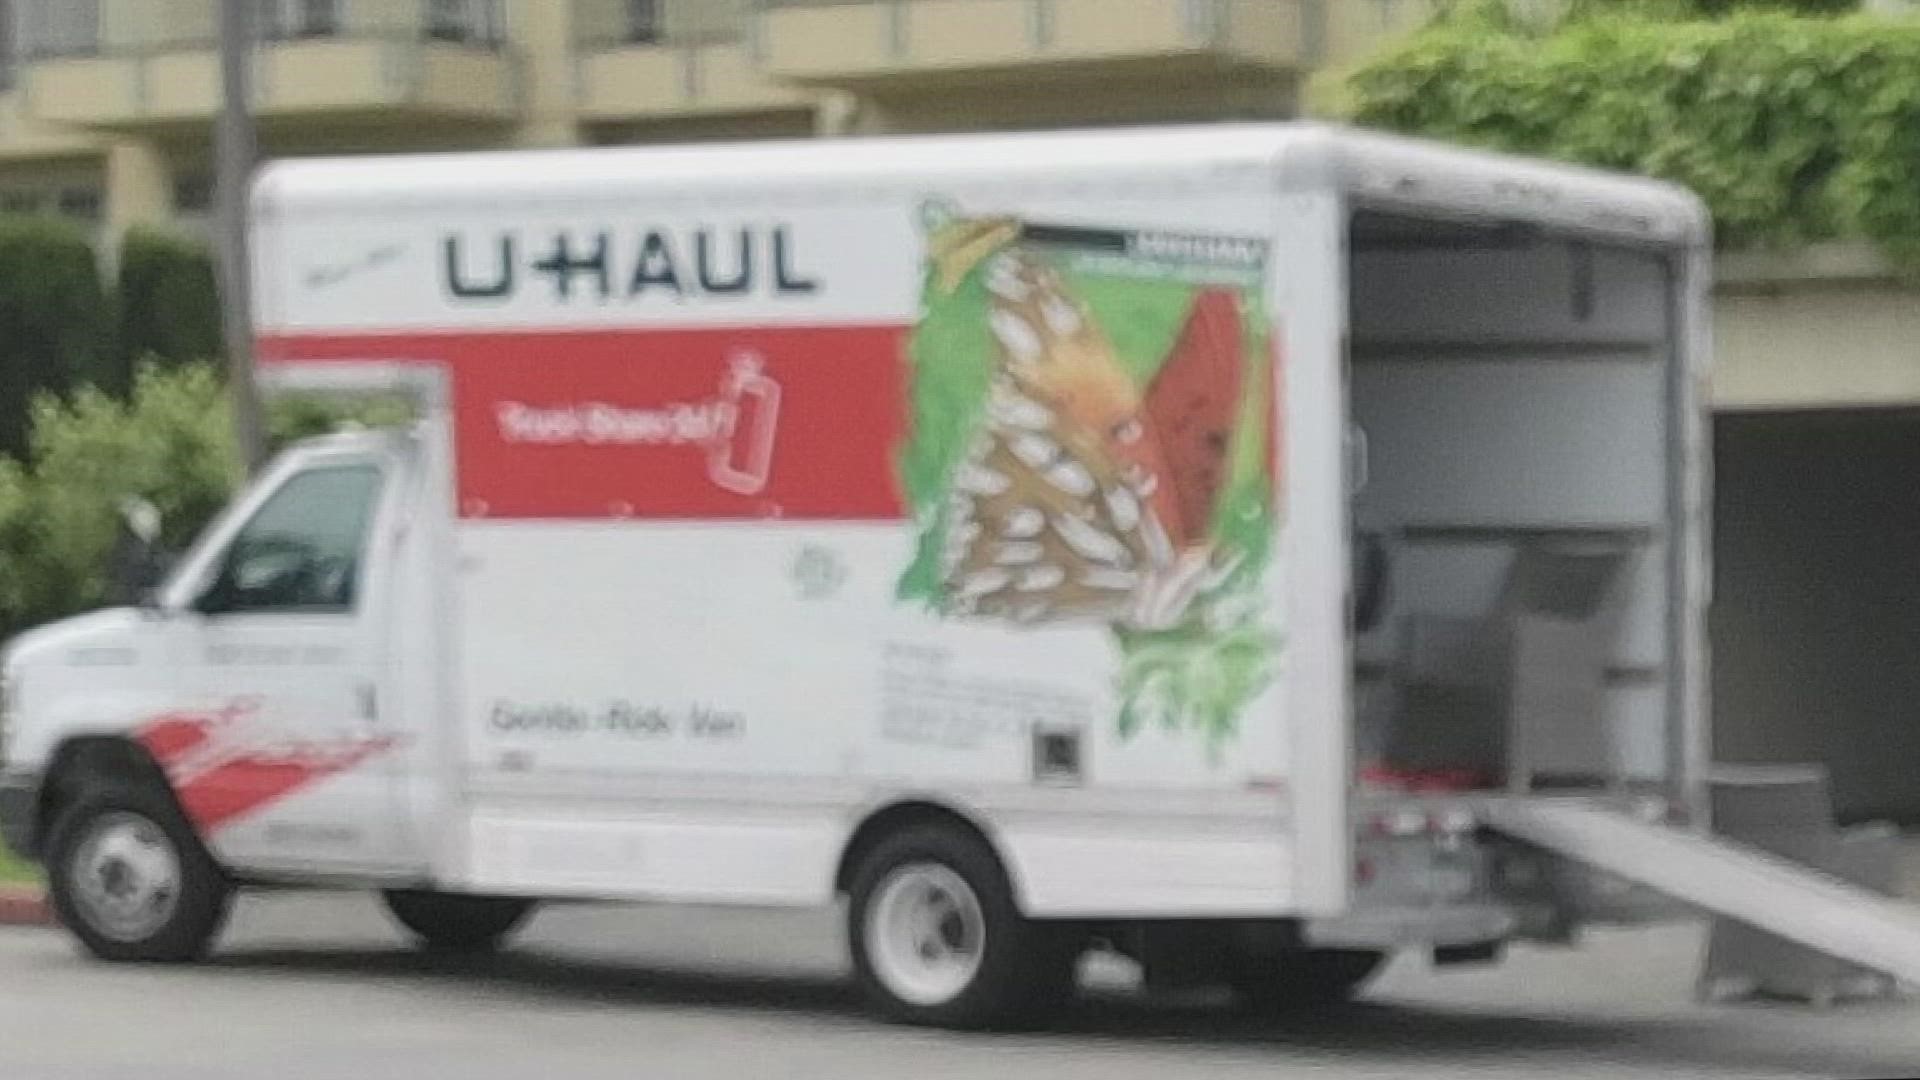 A Portland family who were living in Seattle while helping their daughter during her cancer treatment is seeking help locating their stolen U-Haul.